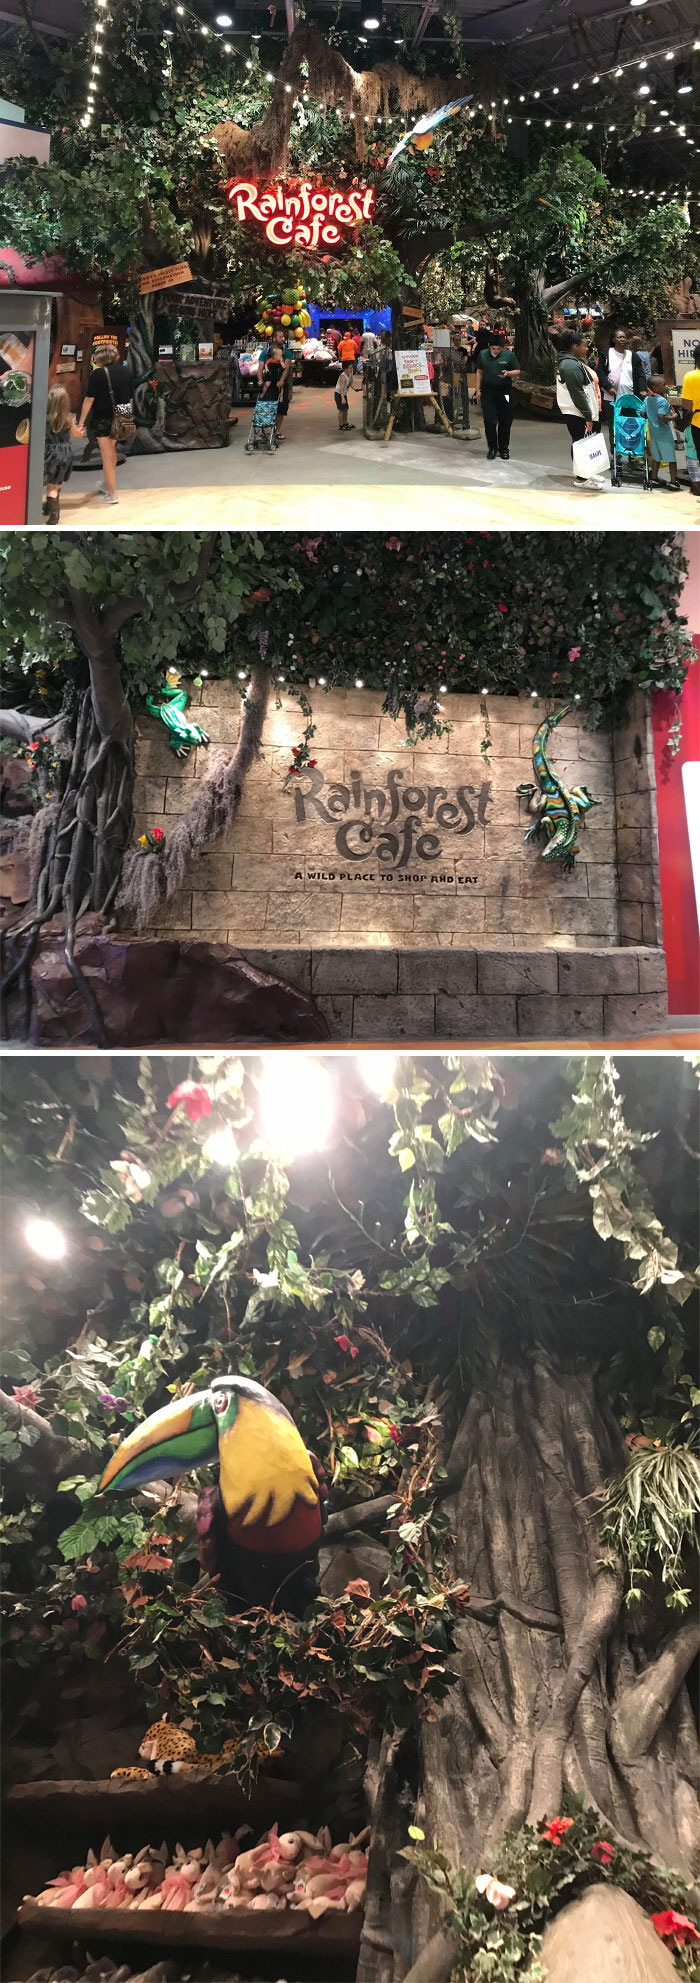 Just Found A Rain Forest Cafe